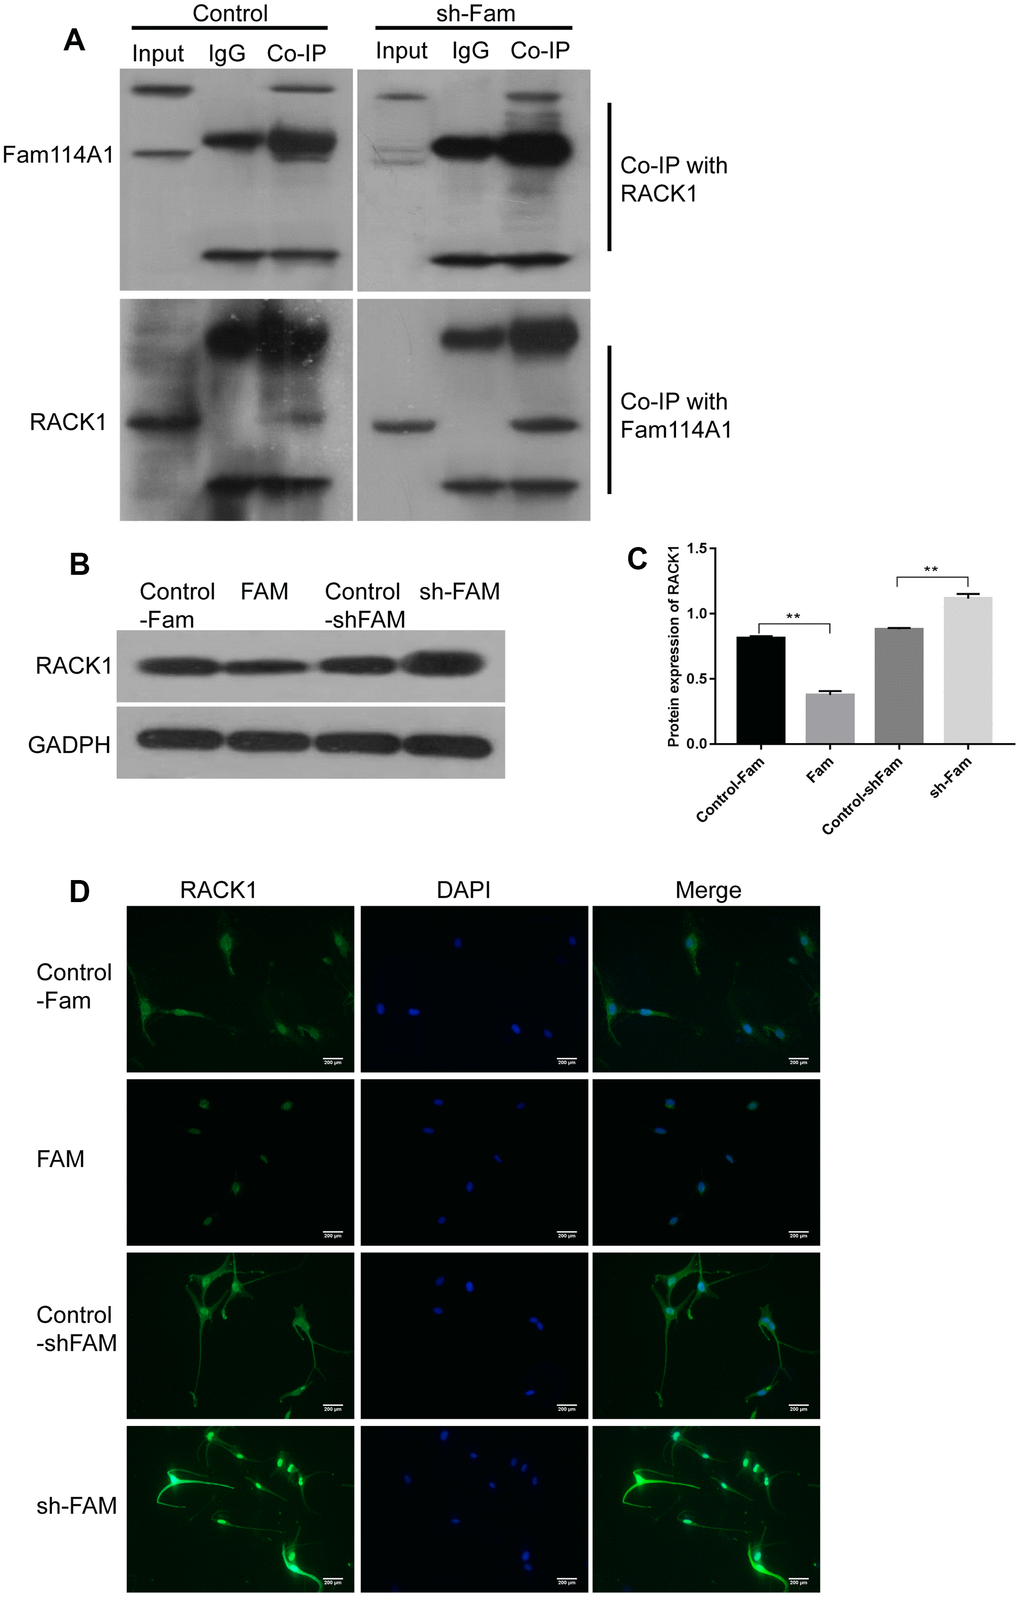 RACK1 is the regulatory target protein of Fam114A1. (A) In the control and sh-Fam groups, regardless of whether RACK1 or FAM1141 antibody was used for Co-IP, the mutual binding of RACK1 and Fam114A1 was observed, and it was observed that after the expression of Fam114A1 protein was inhibited, the co-precipitated RACK1 protein increased instead. (B, C) The expression of RACK1 in melanocyte of Fam, sh-Fam and their controls was detected by western bolt, the expression of RACK1 protein is negatively regulated by Fam114A1 protein. Statistical analyses were performed using one-way ANOVA and Dunnett’s post hoc test: **P D) The immunofluorescence detection of RACK1, the negatively regulation between Fam114A1 and RACK1 was confirmed once again.